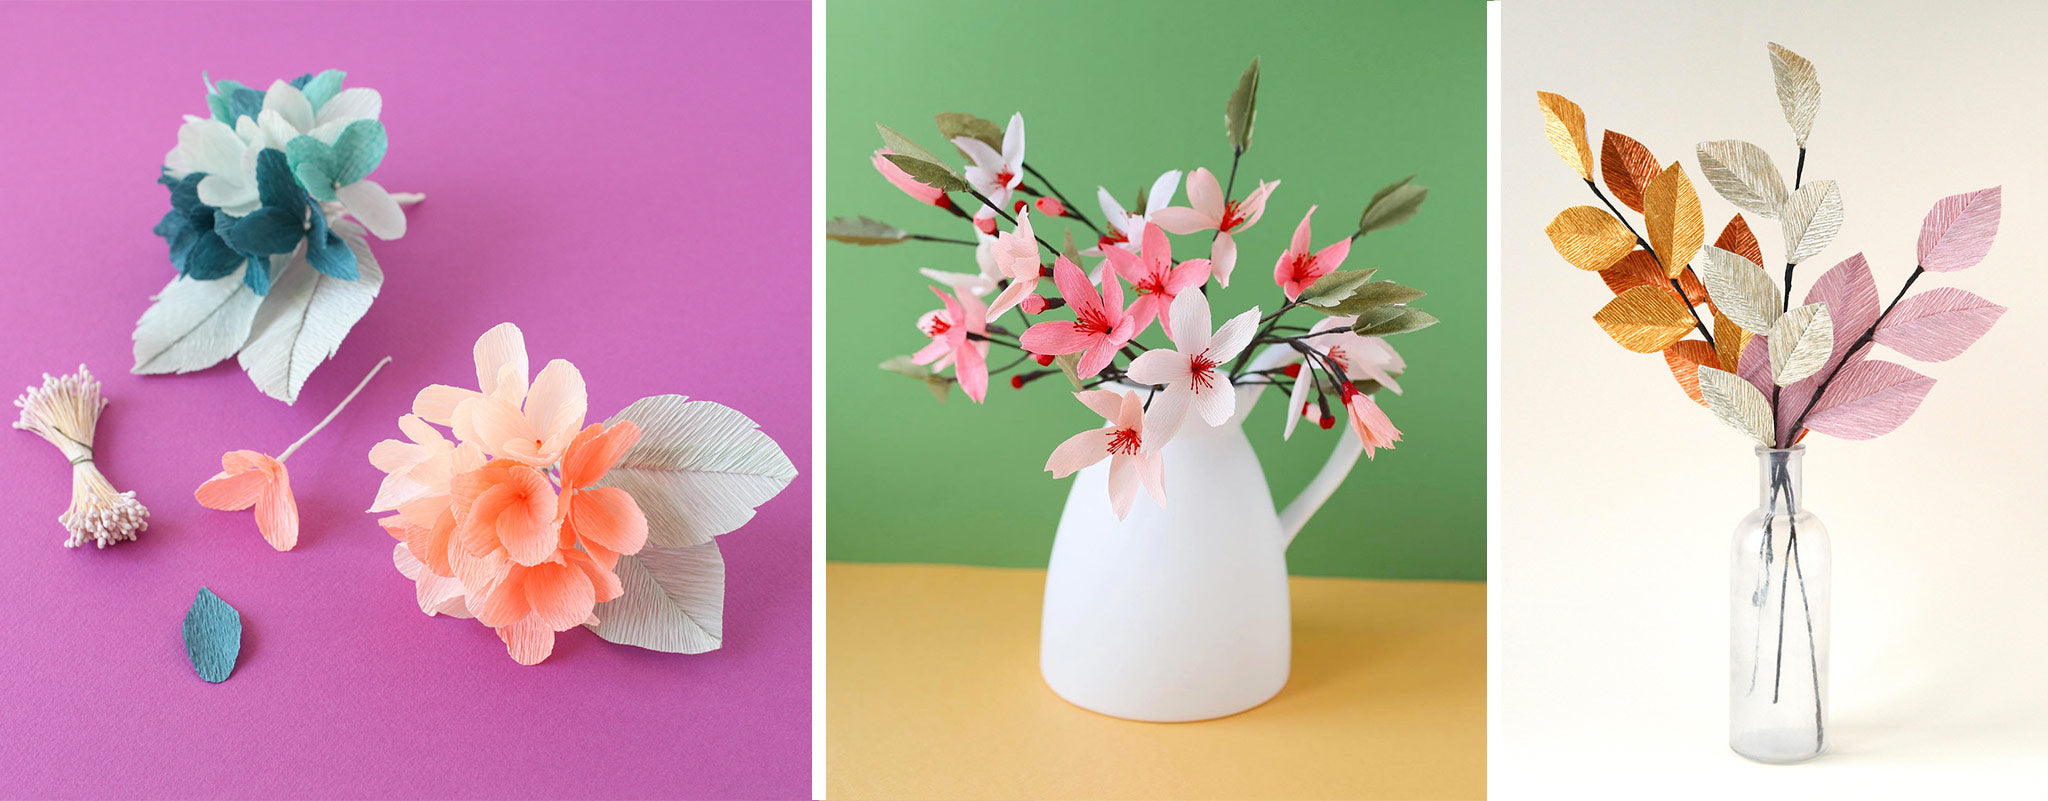 article-blog-tips-making-paper-flowers-2